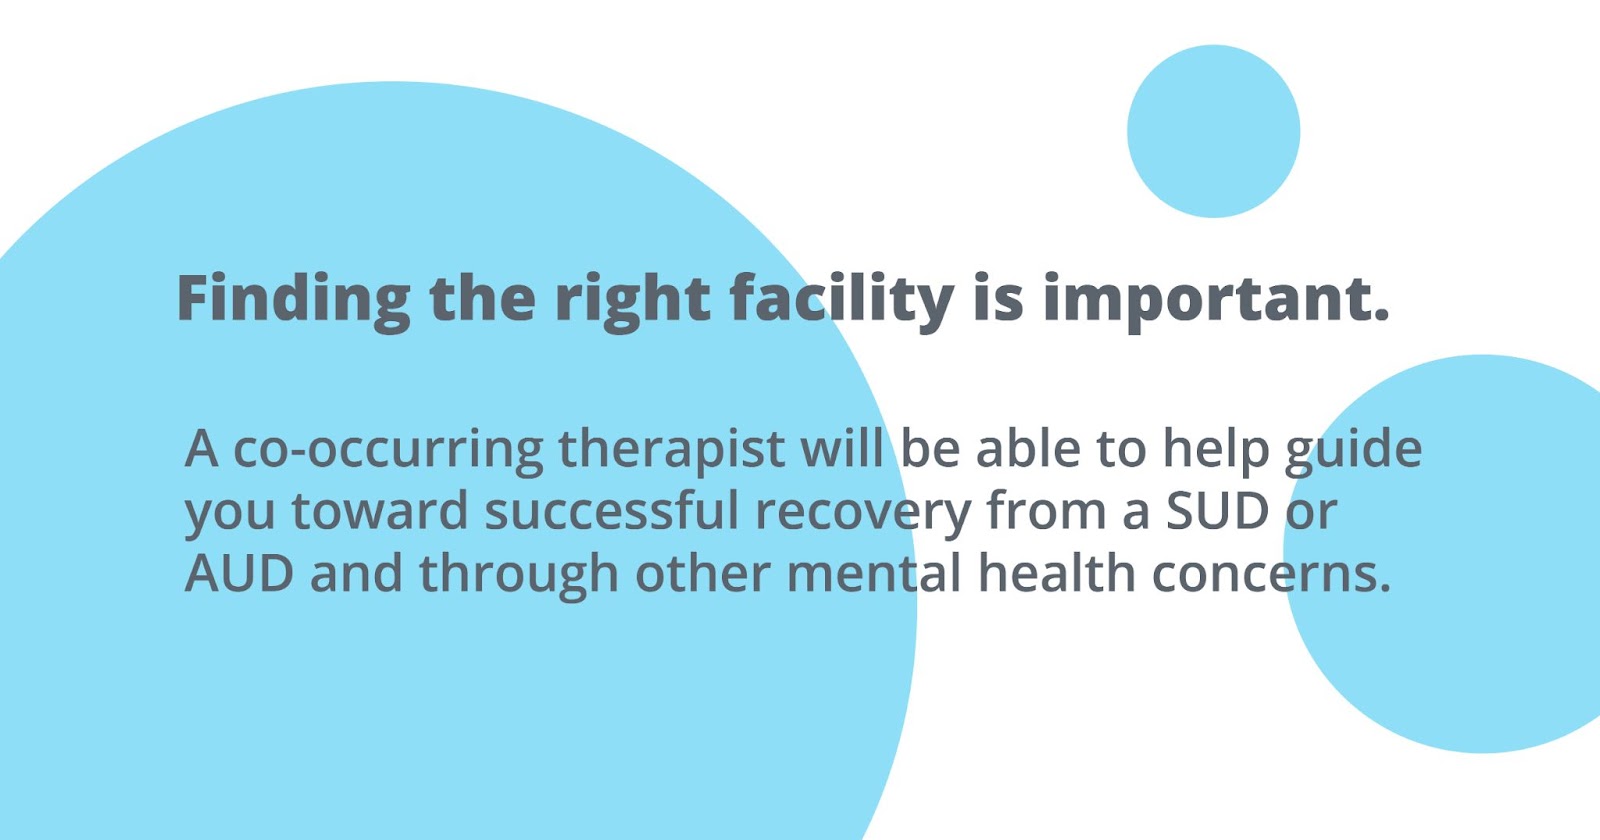 finding the right facility is important. a cooccurring therapist will be able to help guide you toward successful recovery from a sud or aud and through other mental health concerns